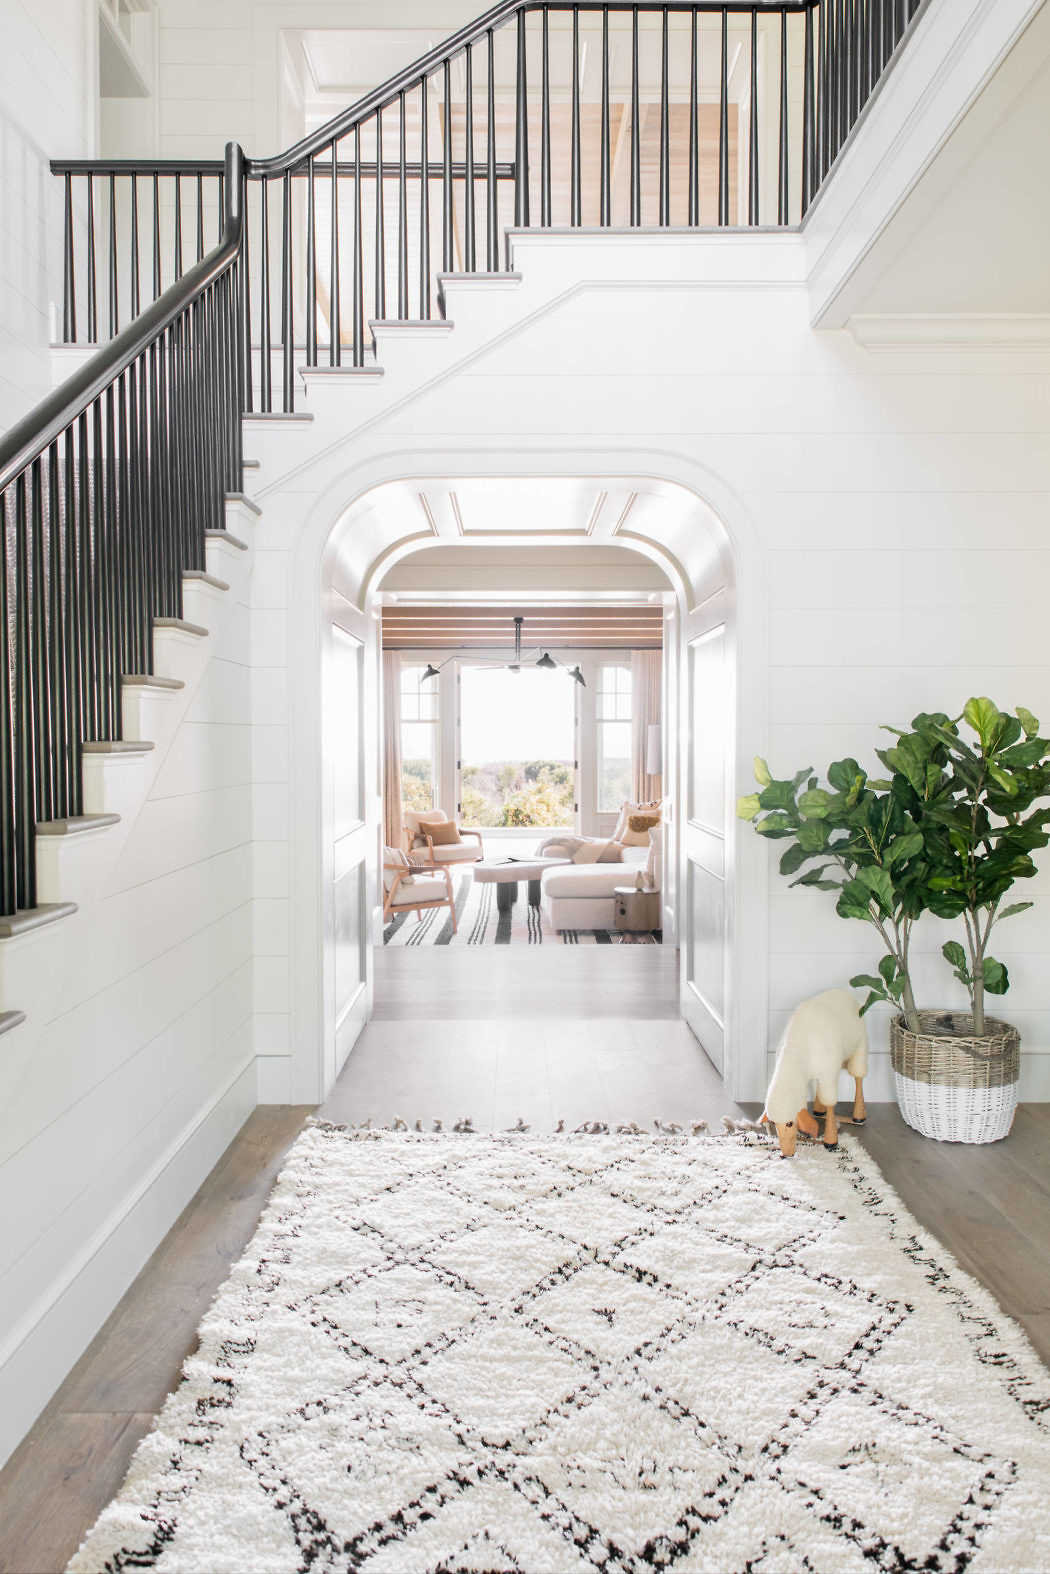 Elegant entryway with a black staircase, white walls, and a patterned